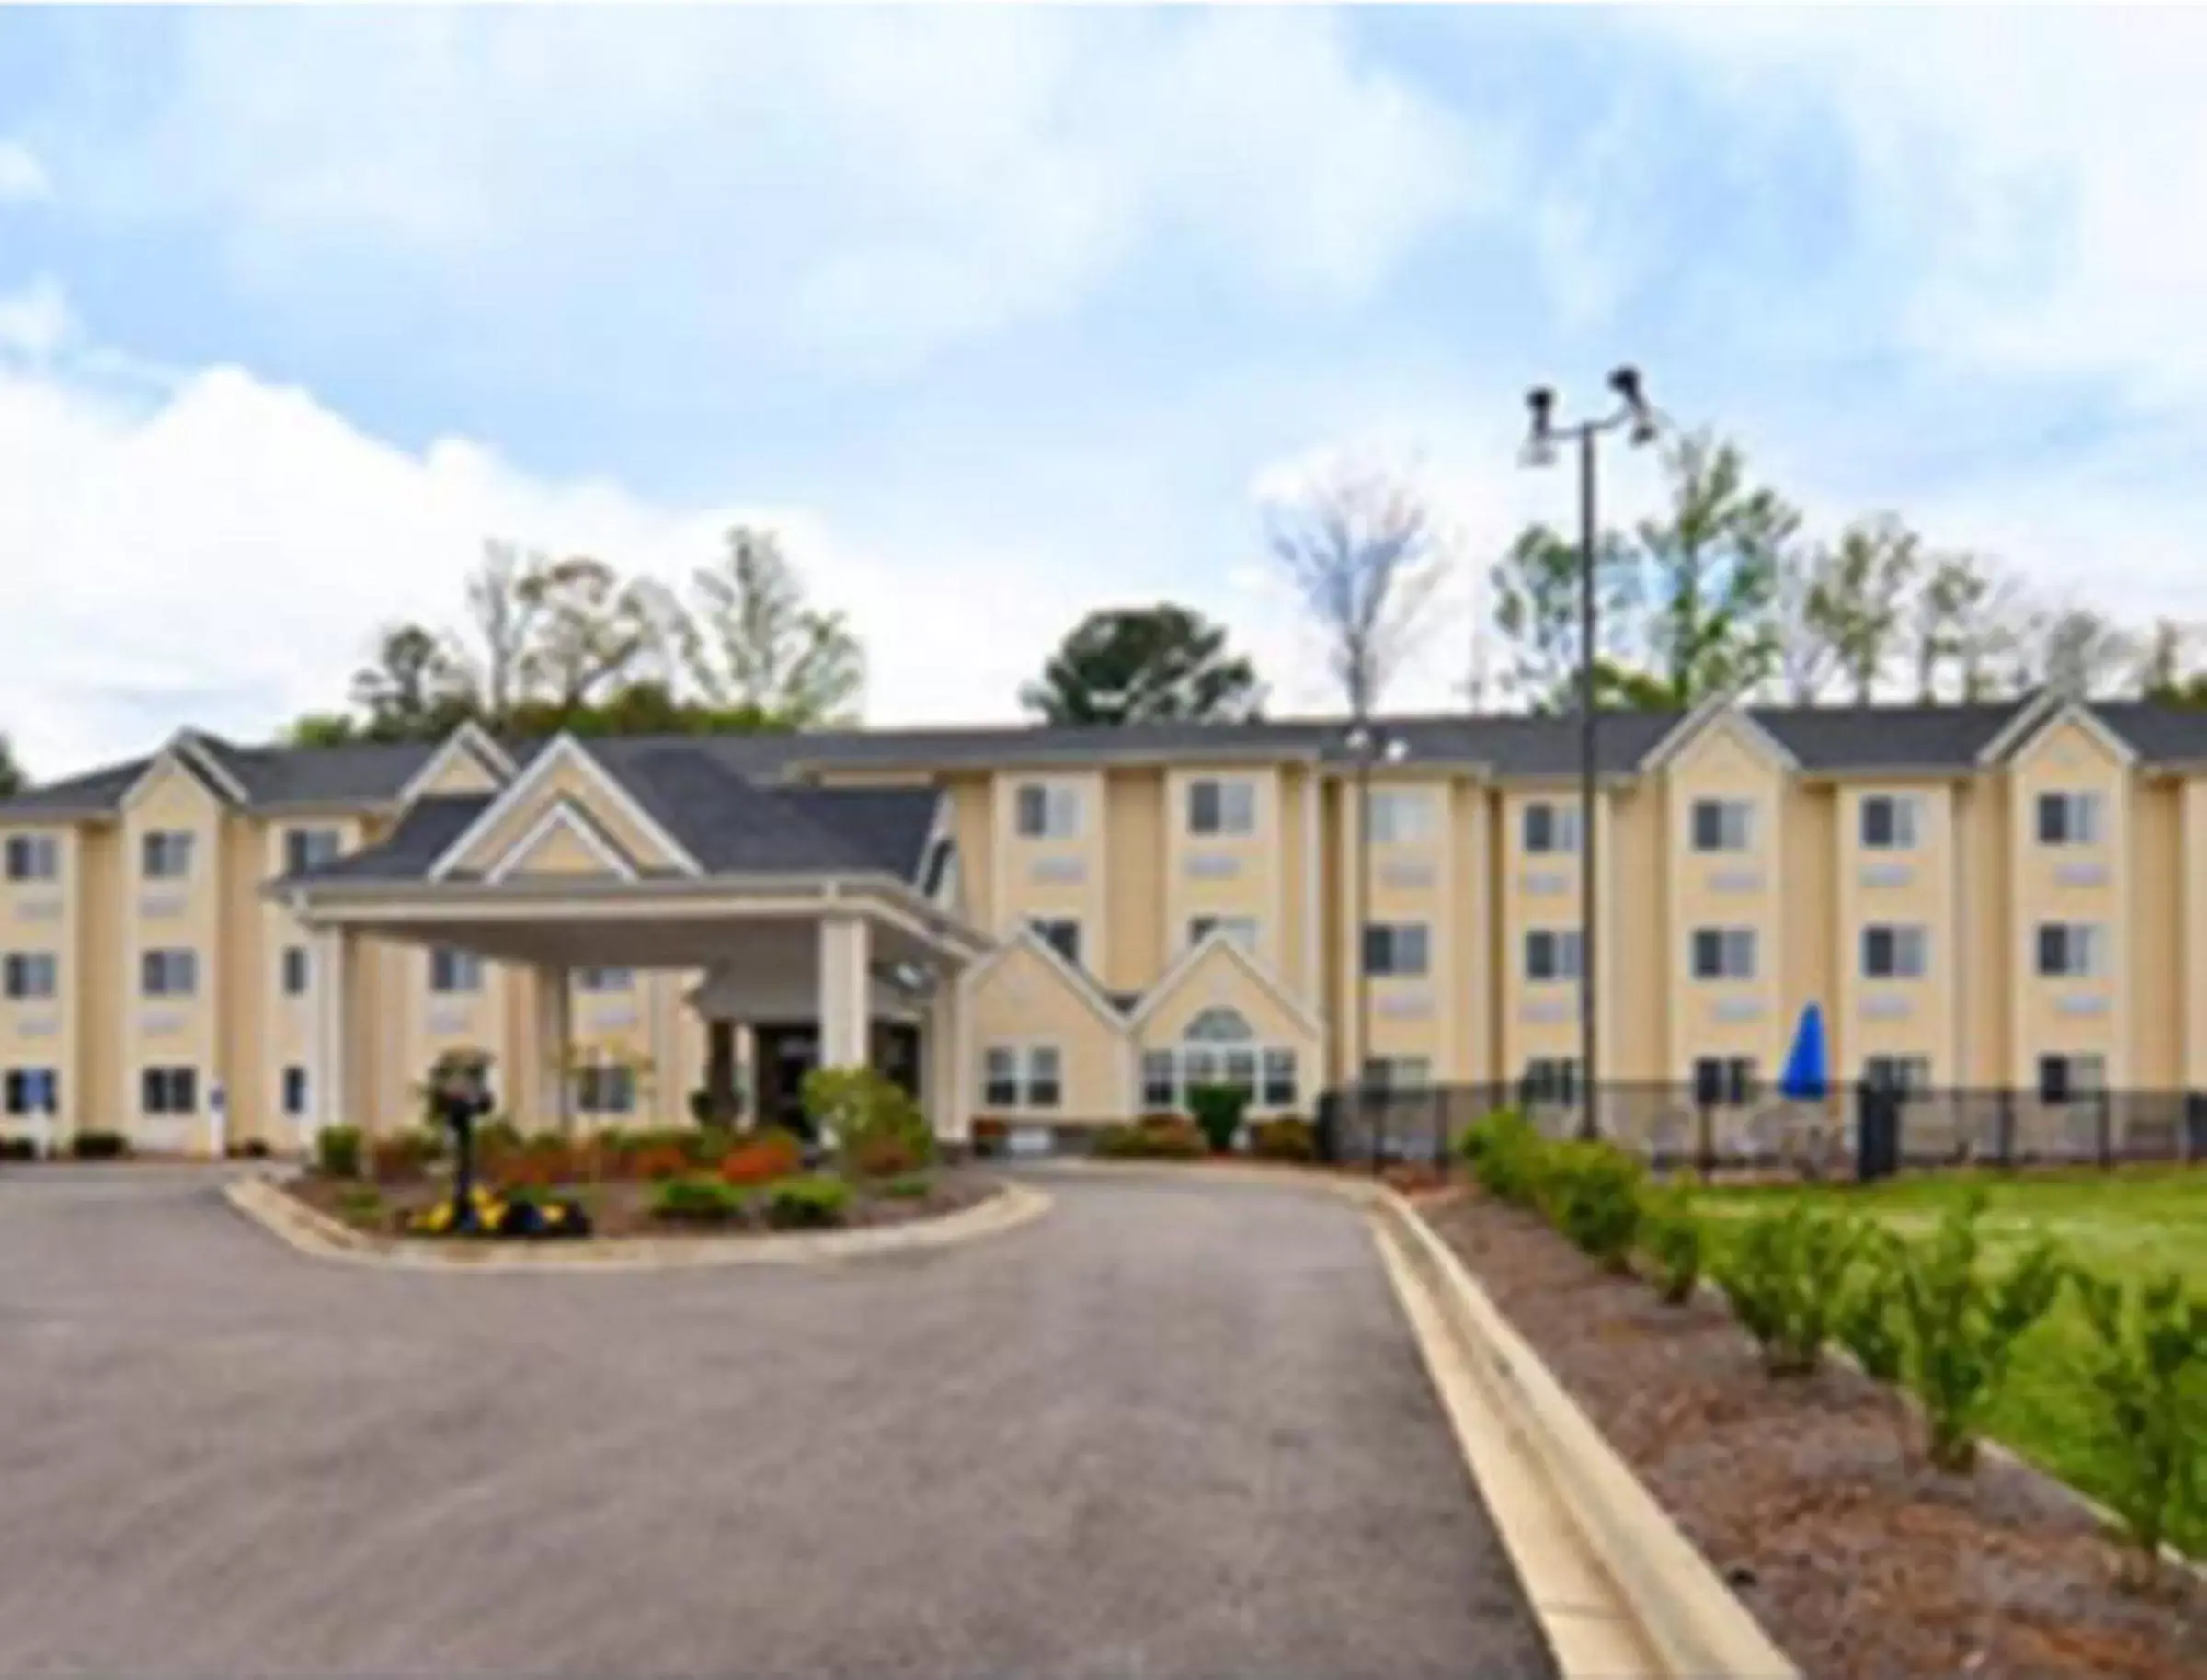 Facade/entrance, Property Building in Microtel Inn & Suites by Wyndham Gardendale